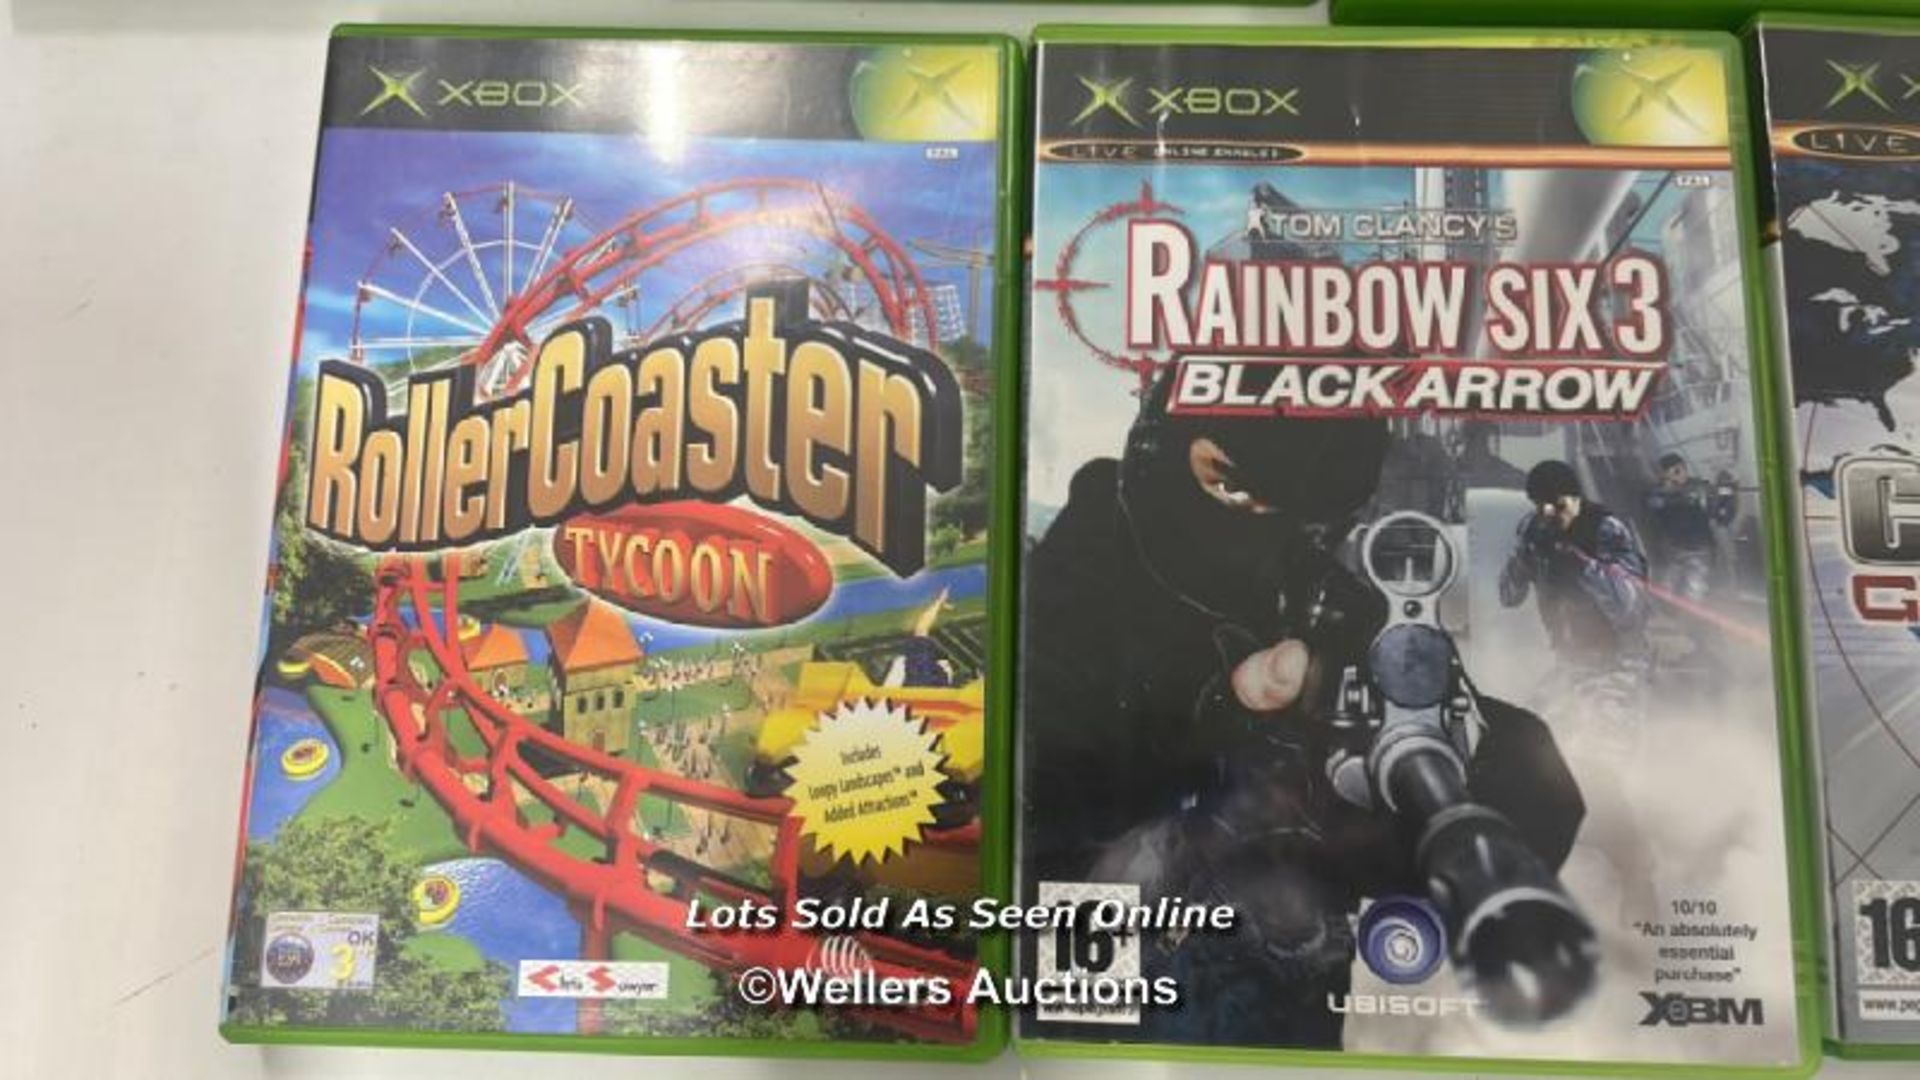 Assorted XBOX games including Terminator 3, Splinter Cell and The Godfather (23) - Image 9 of 9